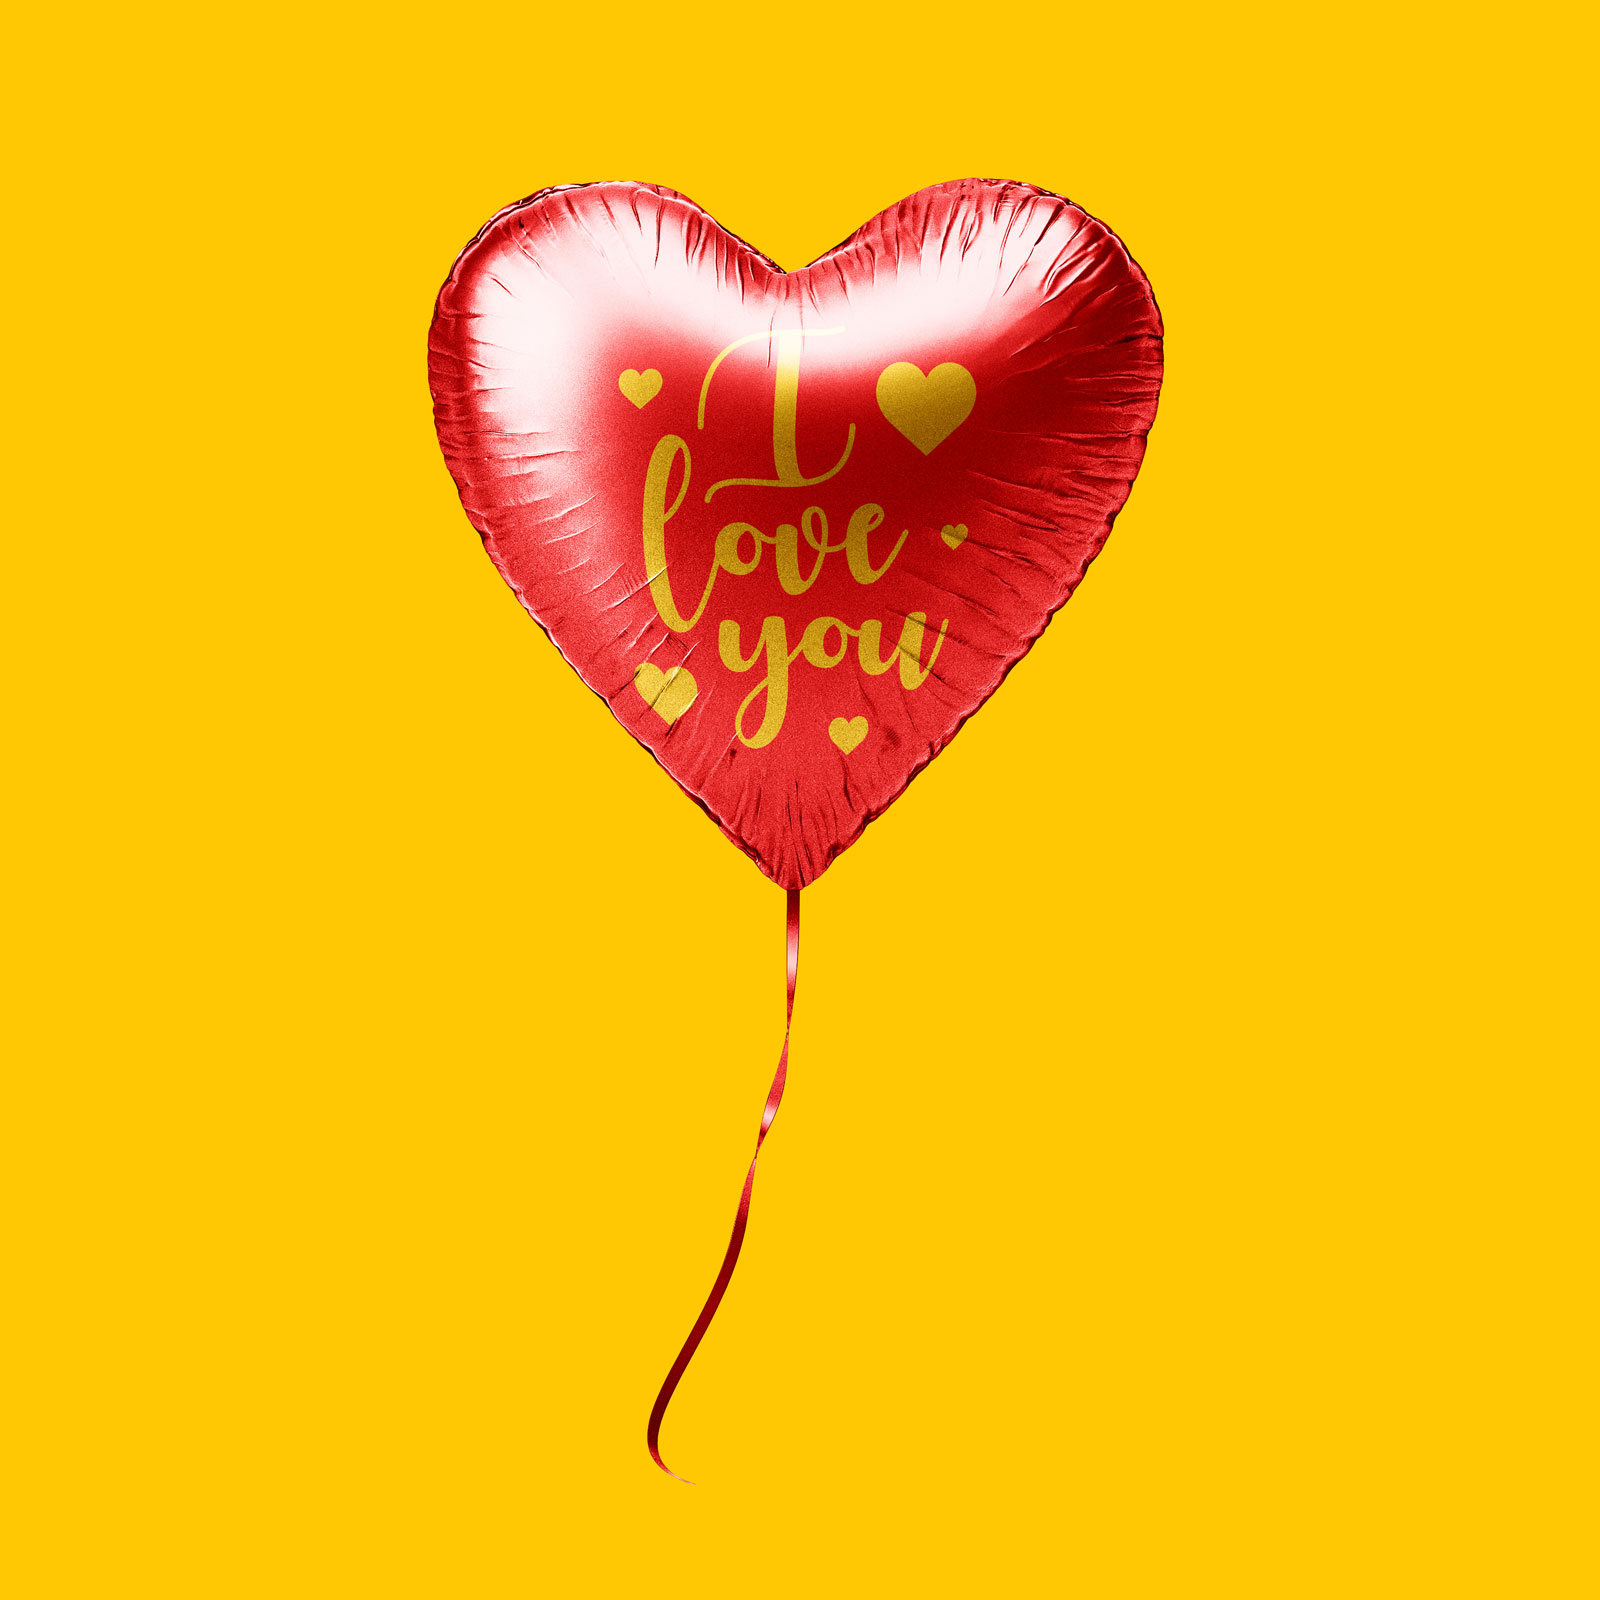 Free-Heart-Balloon-Mockup-PSD-Set-For-Valentine's-Day-2020-3